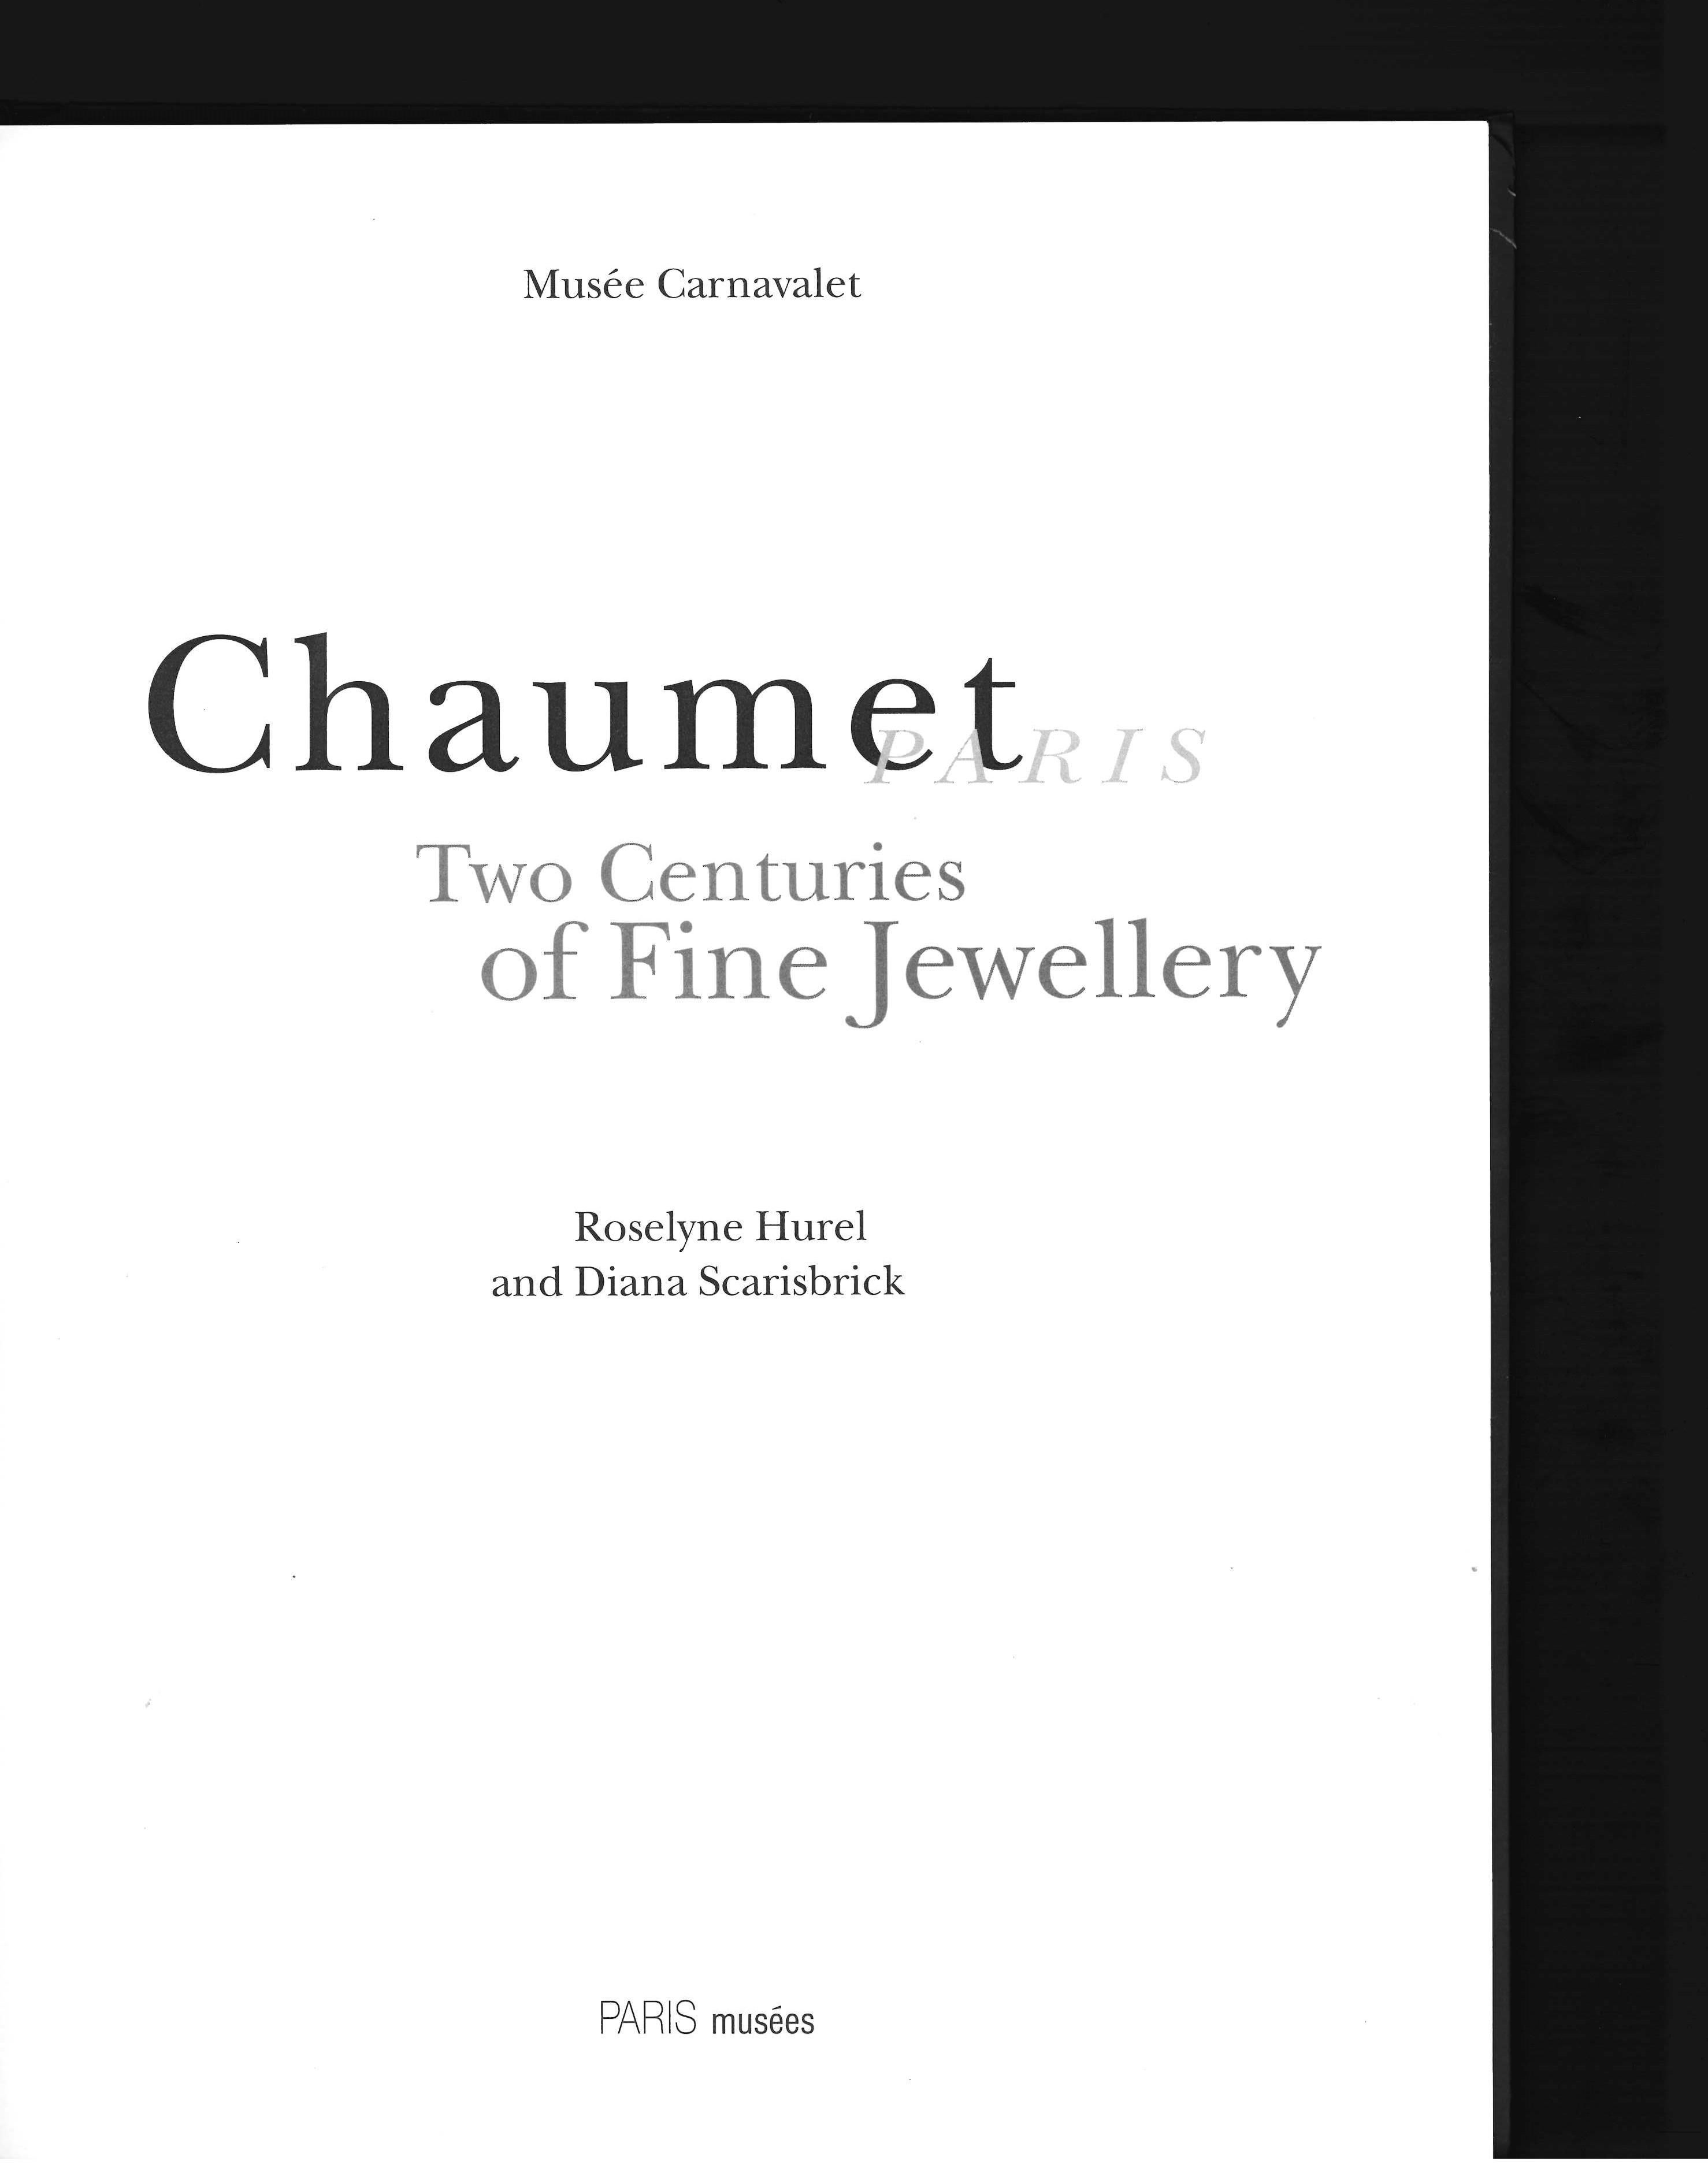 This book was published in 1998 on the occasion of the exhibition held in the Musee Carnavalet 